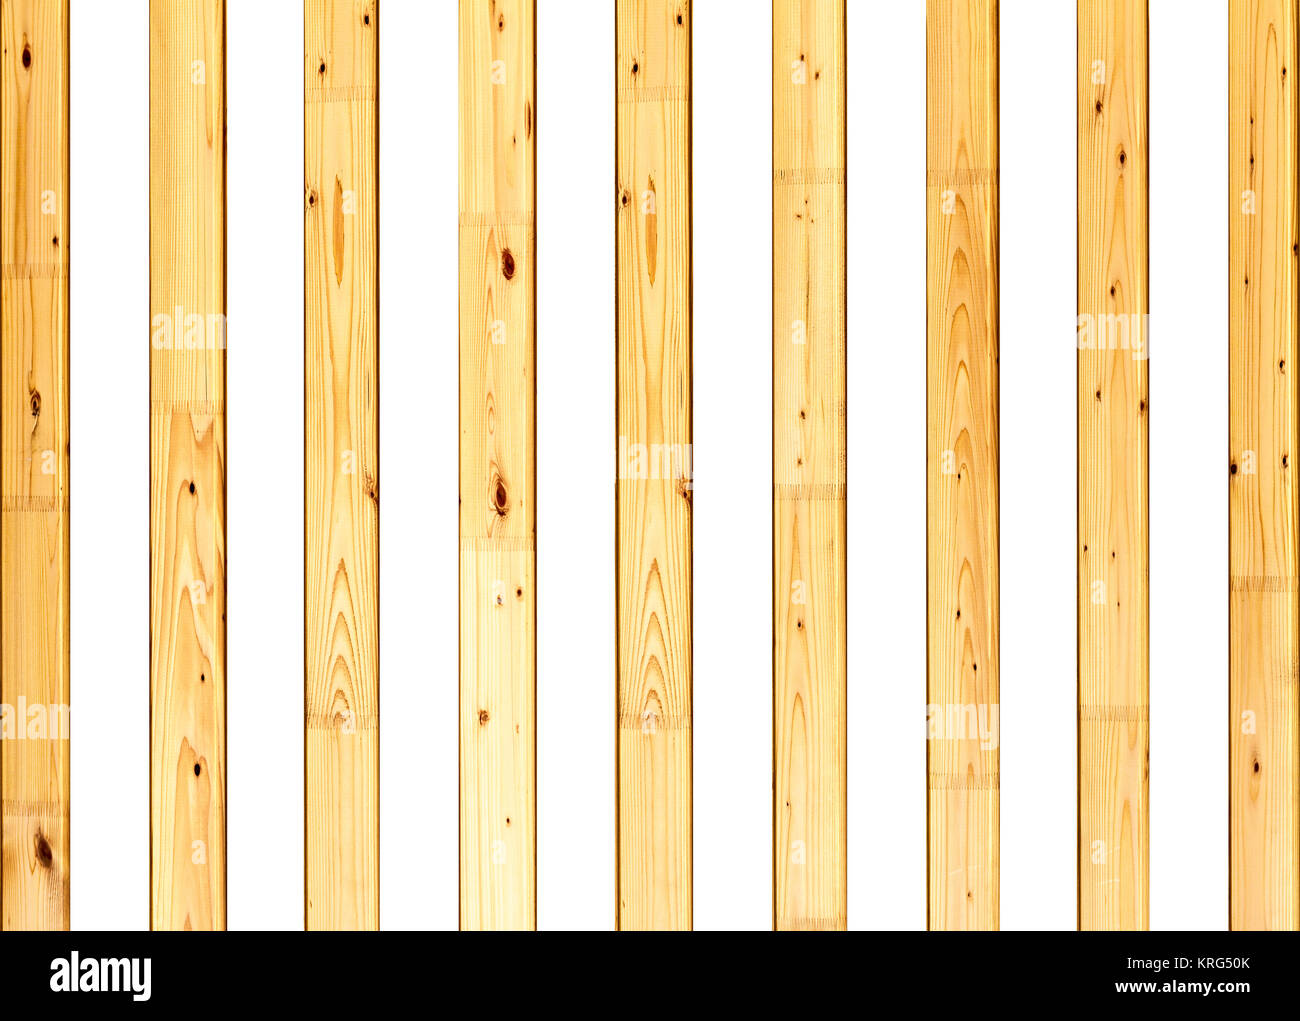 wooden slats on a white background Stock Photo